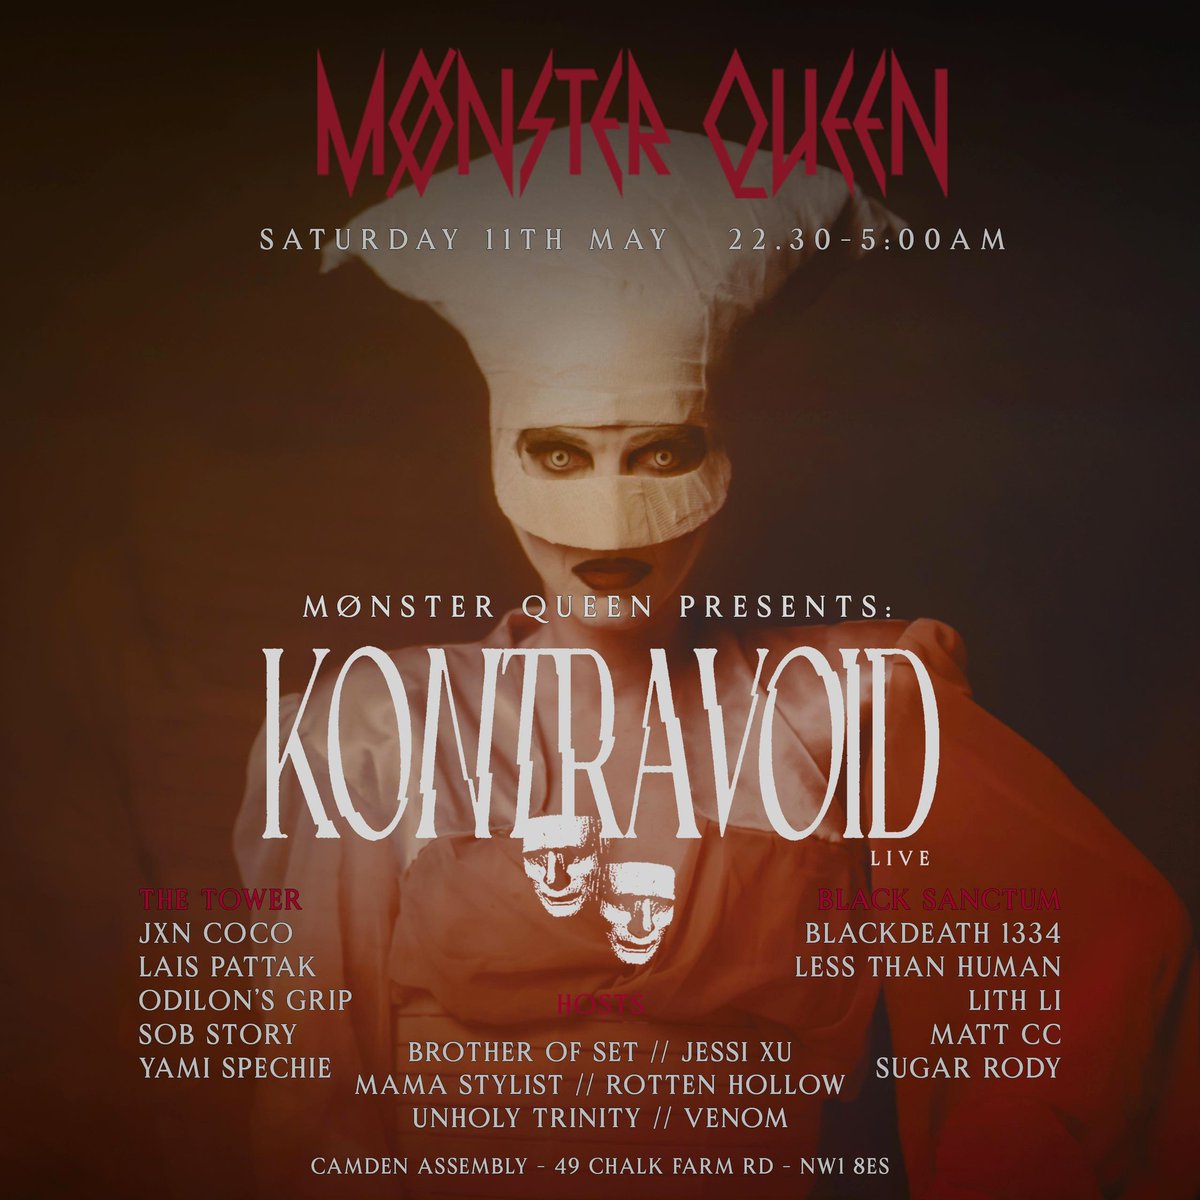 Mønster Queen returns to Camden this May 11th! They'll be welcoming Kontravoid to the stage, alongside an incredible array of worldwide DJs & performers. Tickets moving fast. Make sure to secure yours 😈